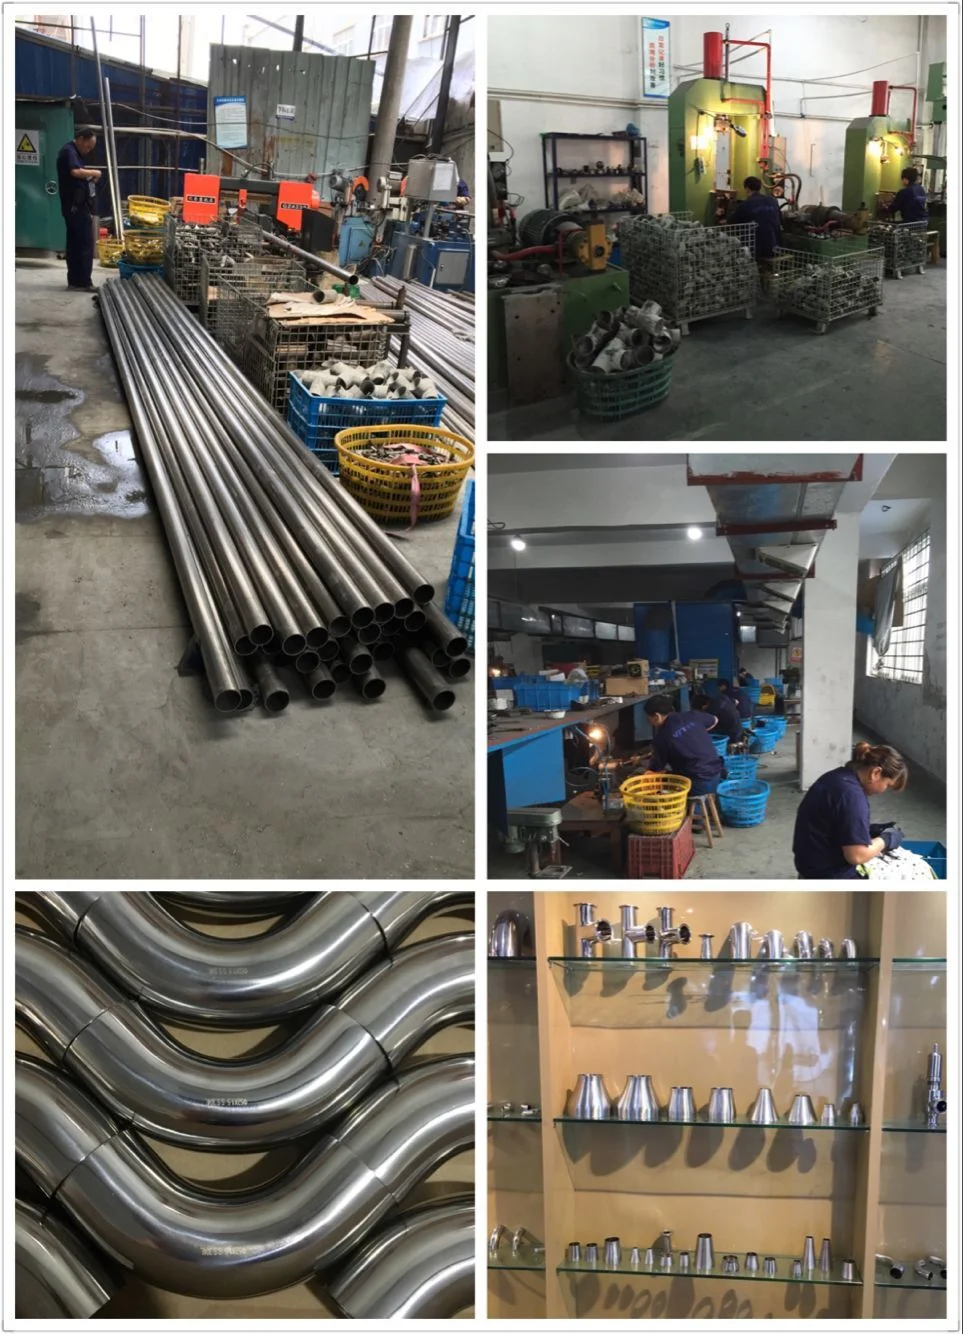 High Pressure Forged Sanitary Grade 316L Stainless Steel Pipe Fittings/Threaded/Thread Union